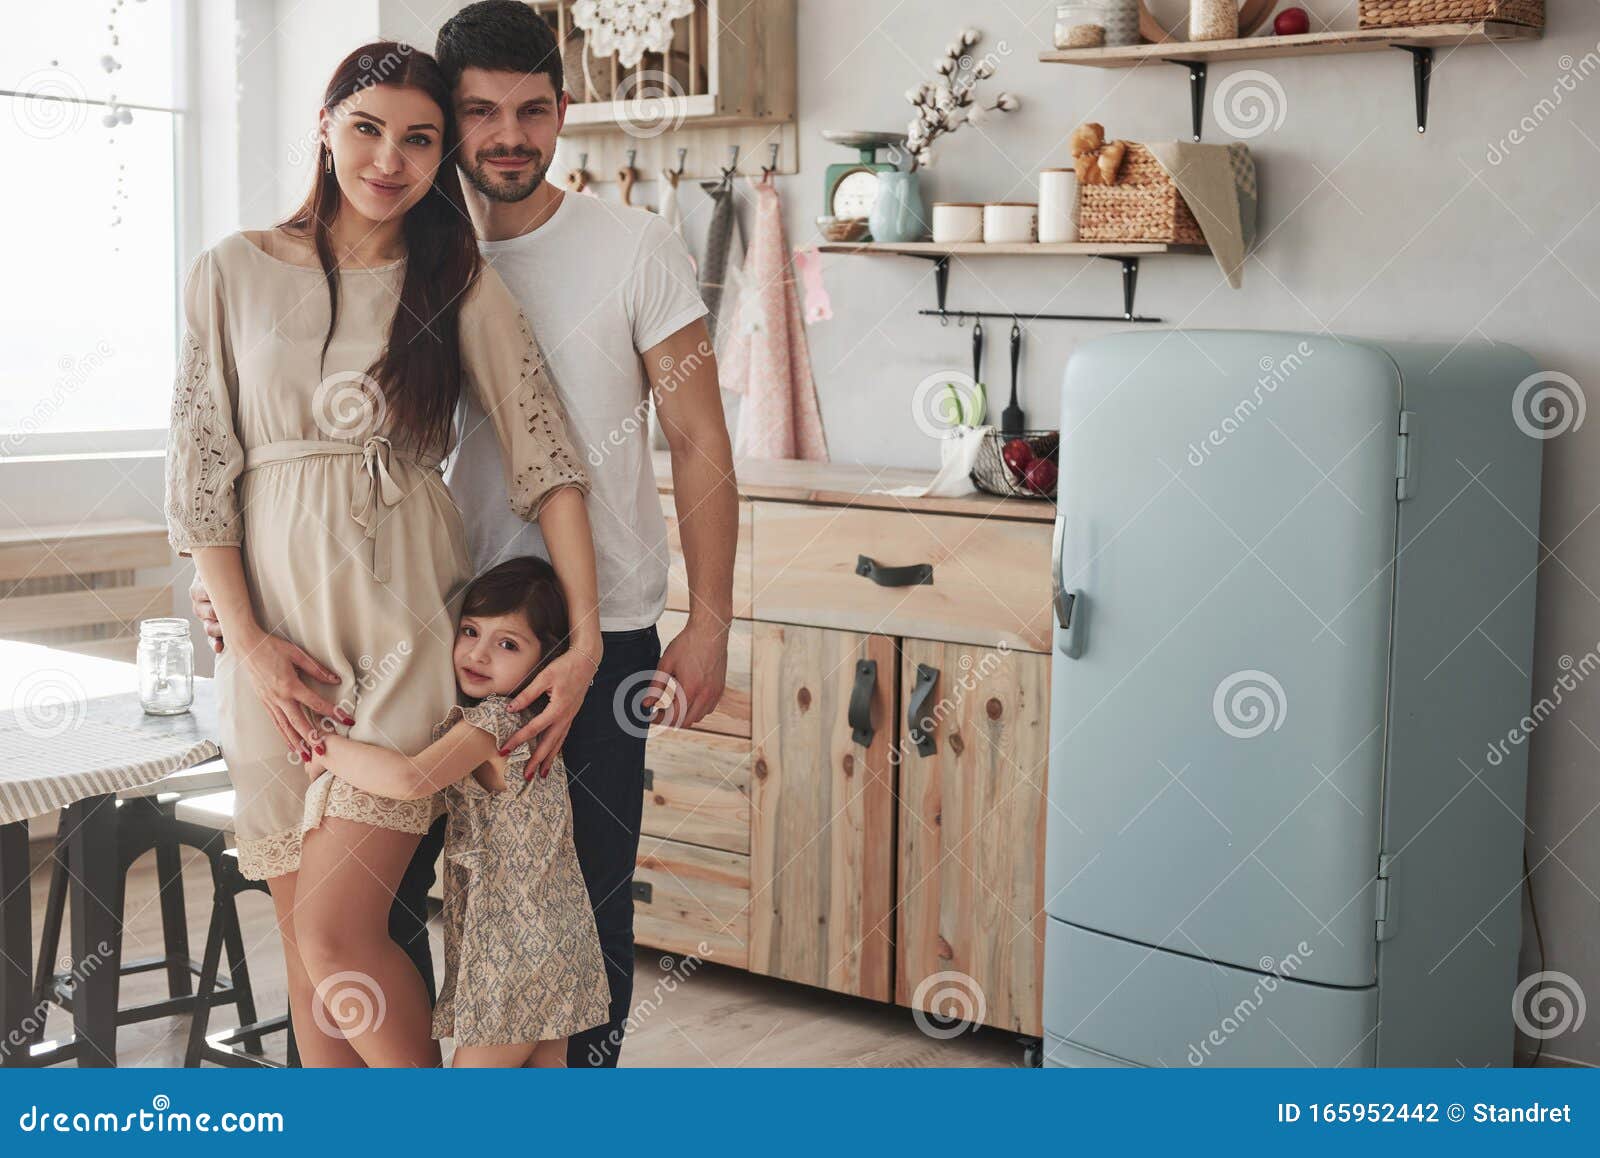 Everyone Hugs Each Other. Cute Family Photo of Pregnant Mother, Father ...